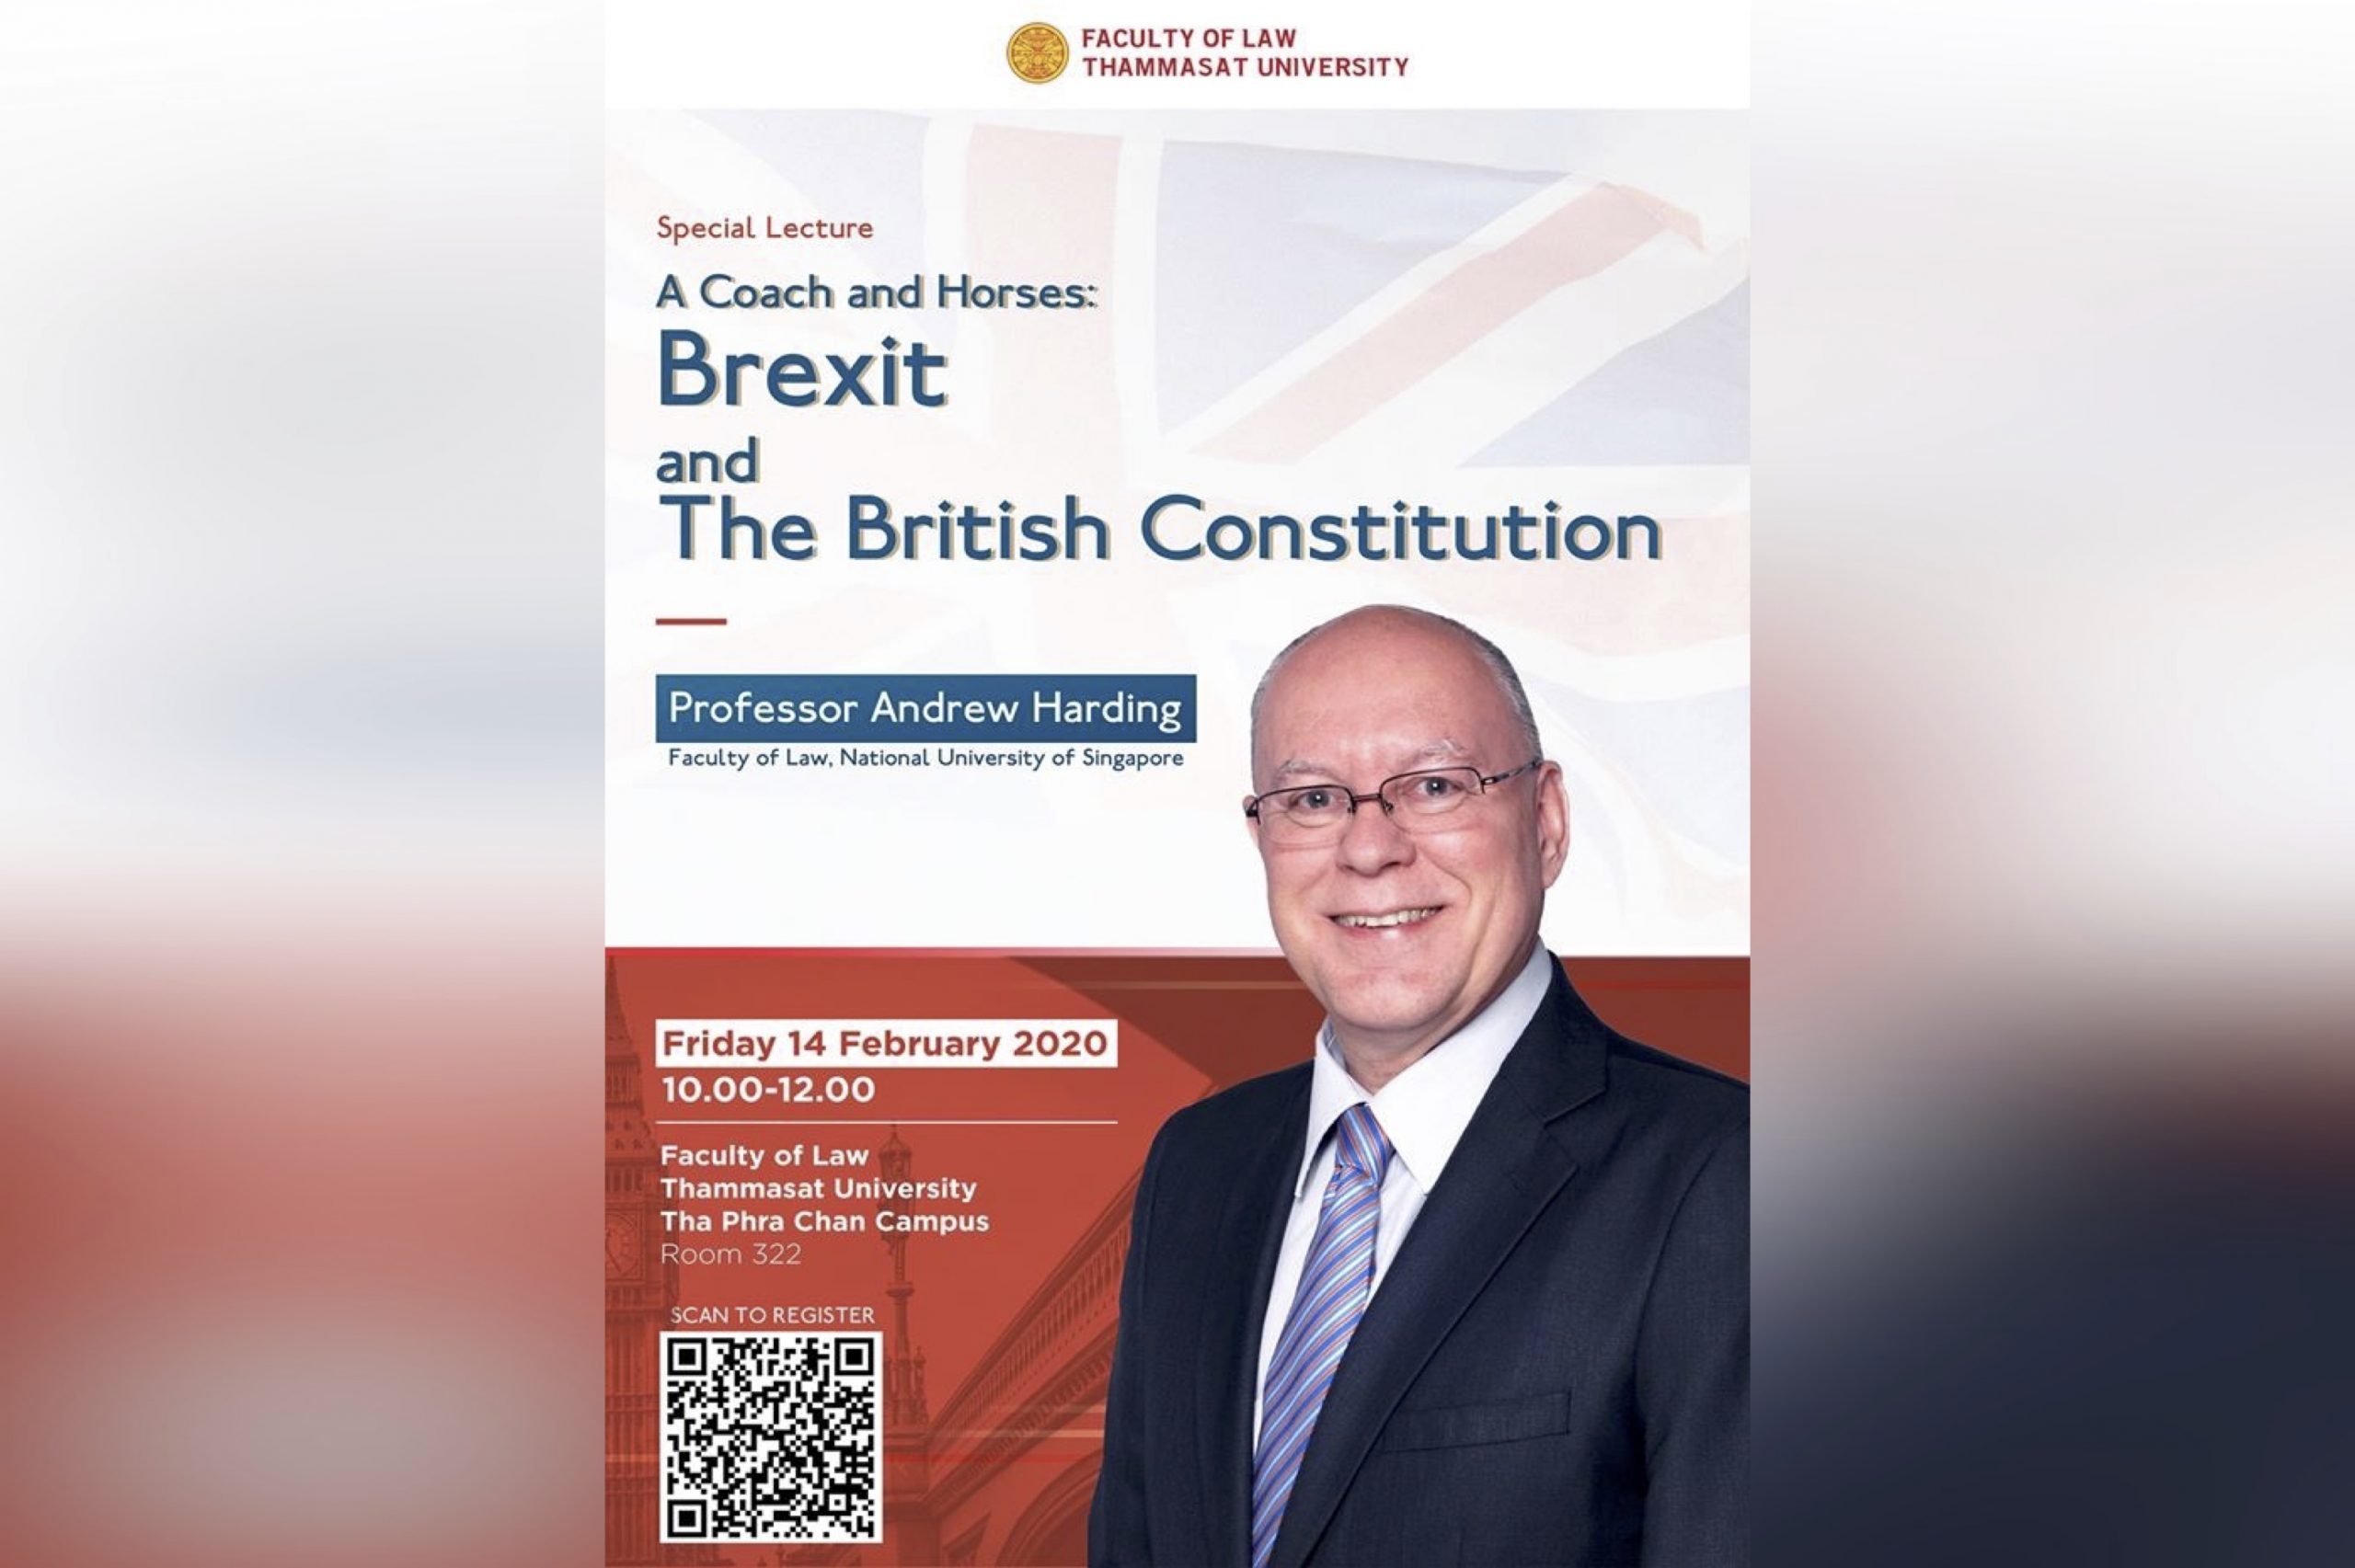 Summary of Special Lecture “A Coach and Horses: Brexit and the British Constitution”